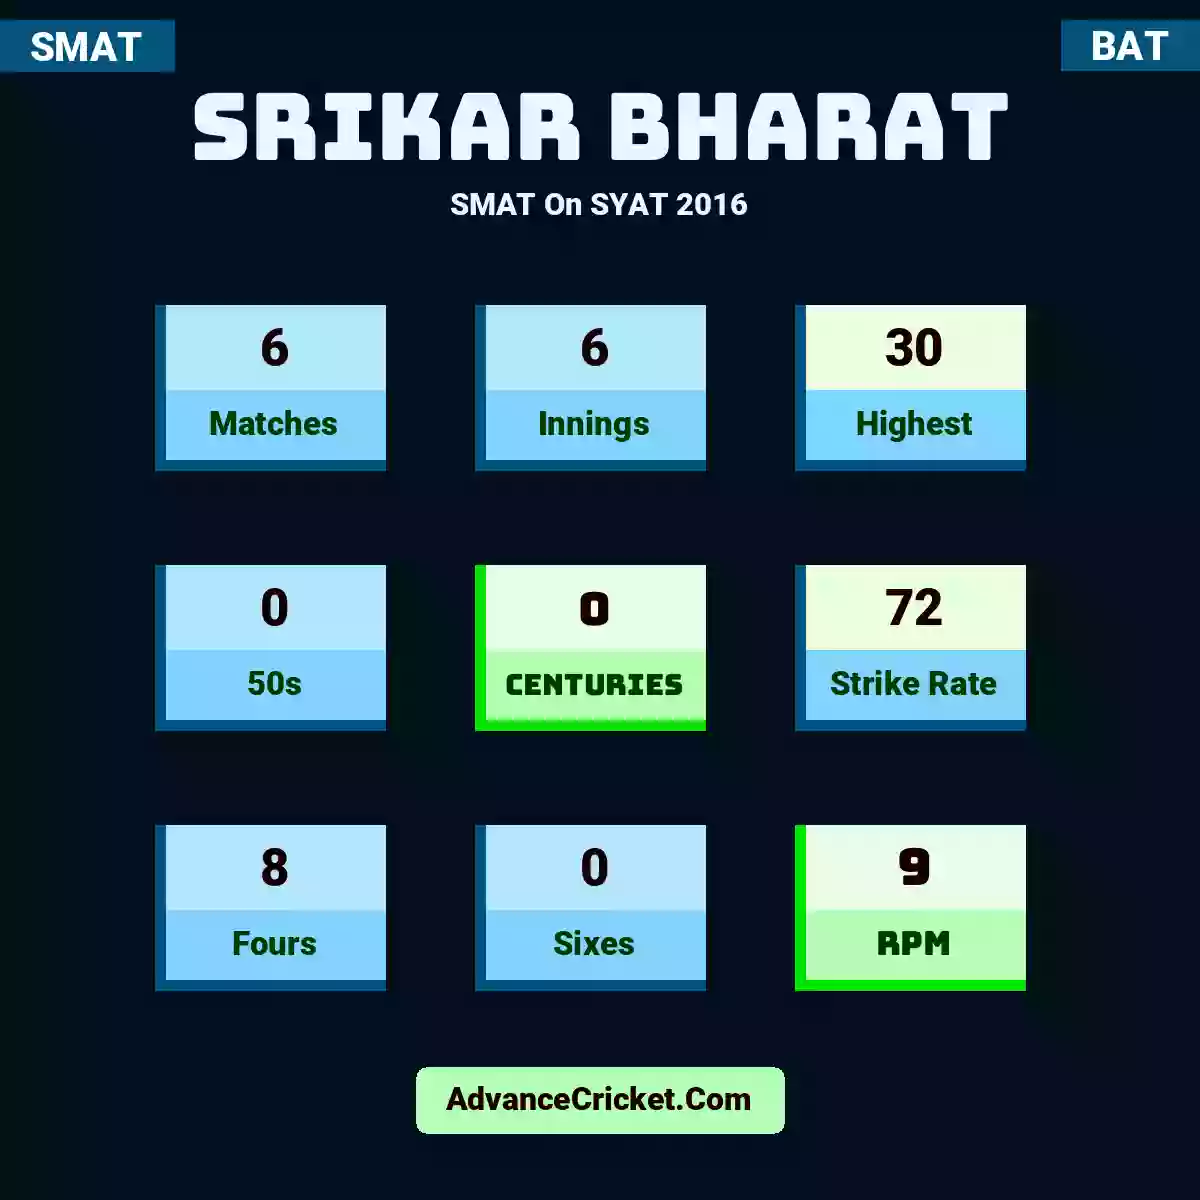 Srikar Bharat SMAT  On SYAT 2016, Srikar Bharat played 6 matches, scored 30 runs as highest, 0 half-centuries, and 0 centuries, with a strike rate of 72. S.Bharat hit 8 fours and 0 sixes, with an RPM of 9.